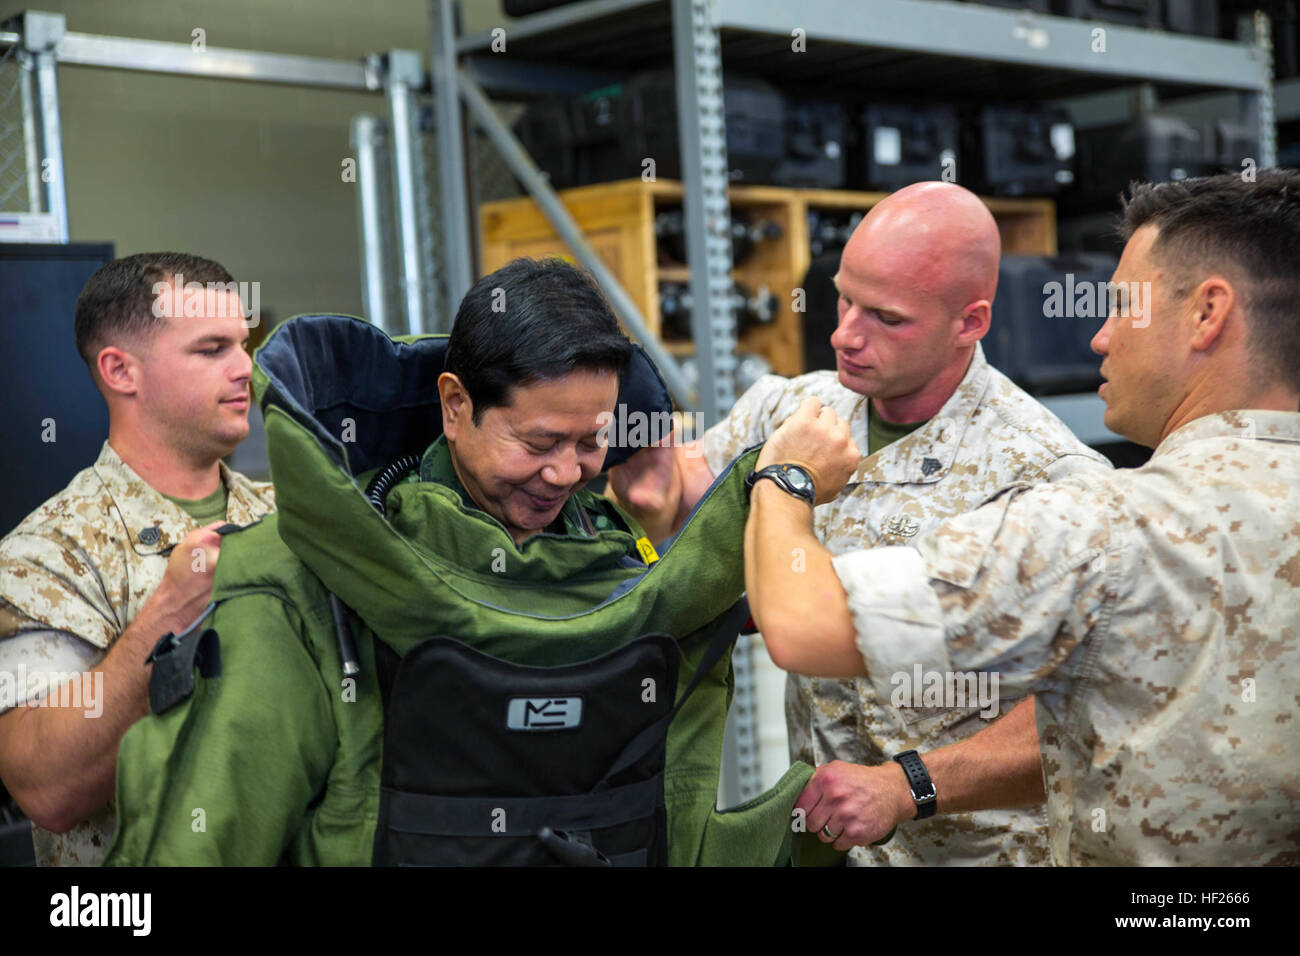 Royal Thai Armed Forces Lt. Gen. Krisda Norapoompipat, second from left, tries on an advanced bomb suit as U.S. Marines secure the outer armor May 19 at Camp Hansen. Norapoompipat visited Camp Hansen to discuss explosive ordnance disposal tactics, techniques and procedures employed by the U.S. Marine Corps, as well as both countries' capabilities for unexploded ordnance disposal training. The Kingdom of Thailand shares a long-standing alliance with the U.S., and both countries frequently work together in humanitarian aid efforts, preparation and training exercises. Norapoompipat is the directo Stock Photo